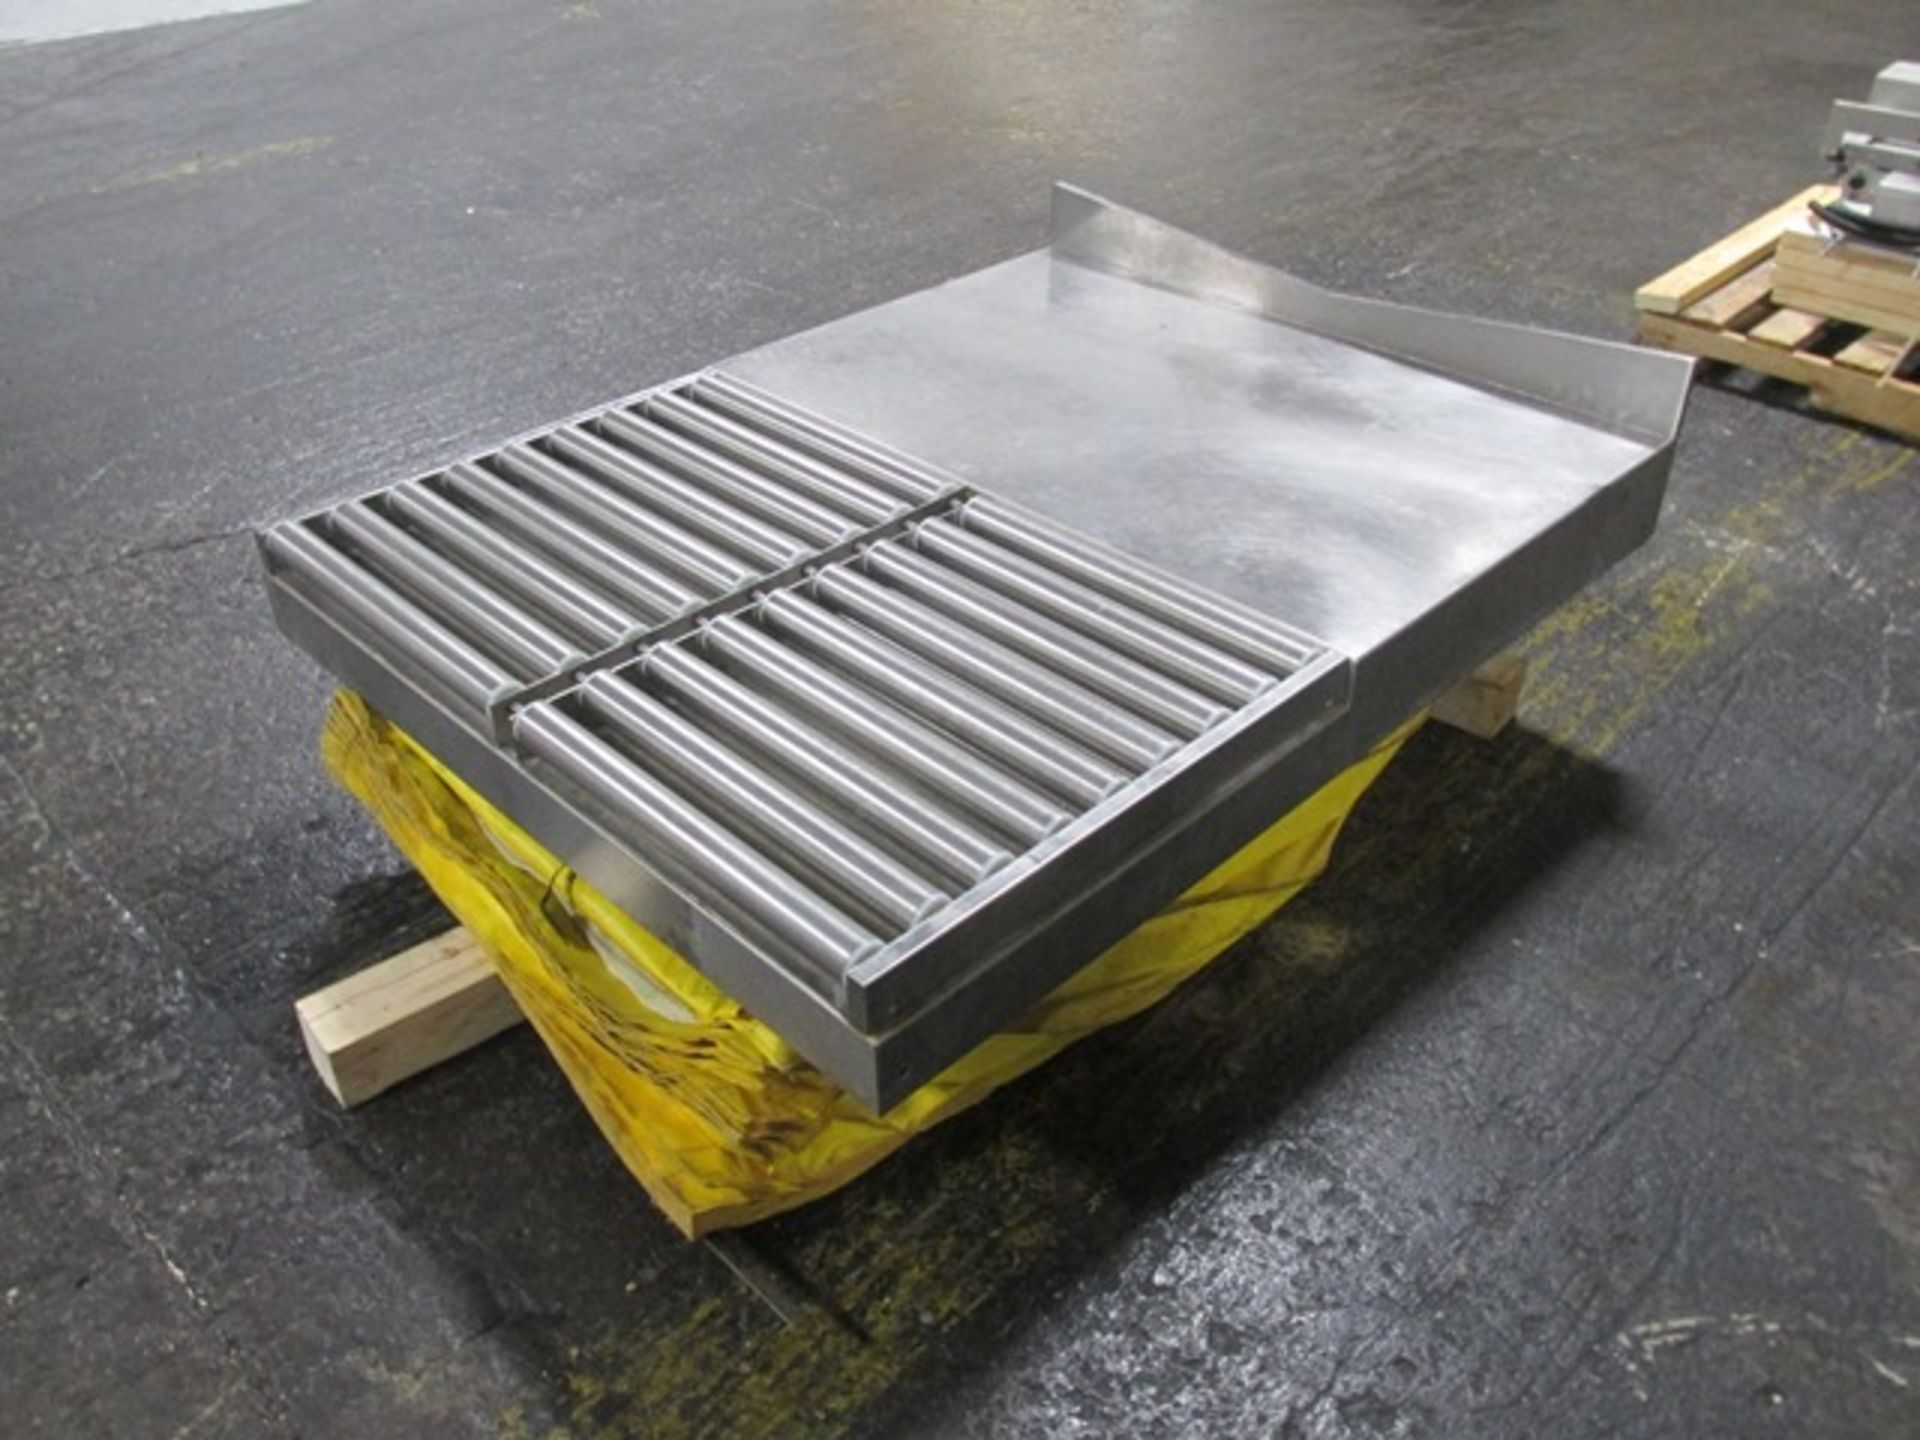 55" x 42" Roller Lift Table, S/S - Image 2 of 2